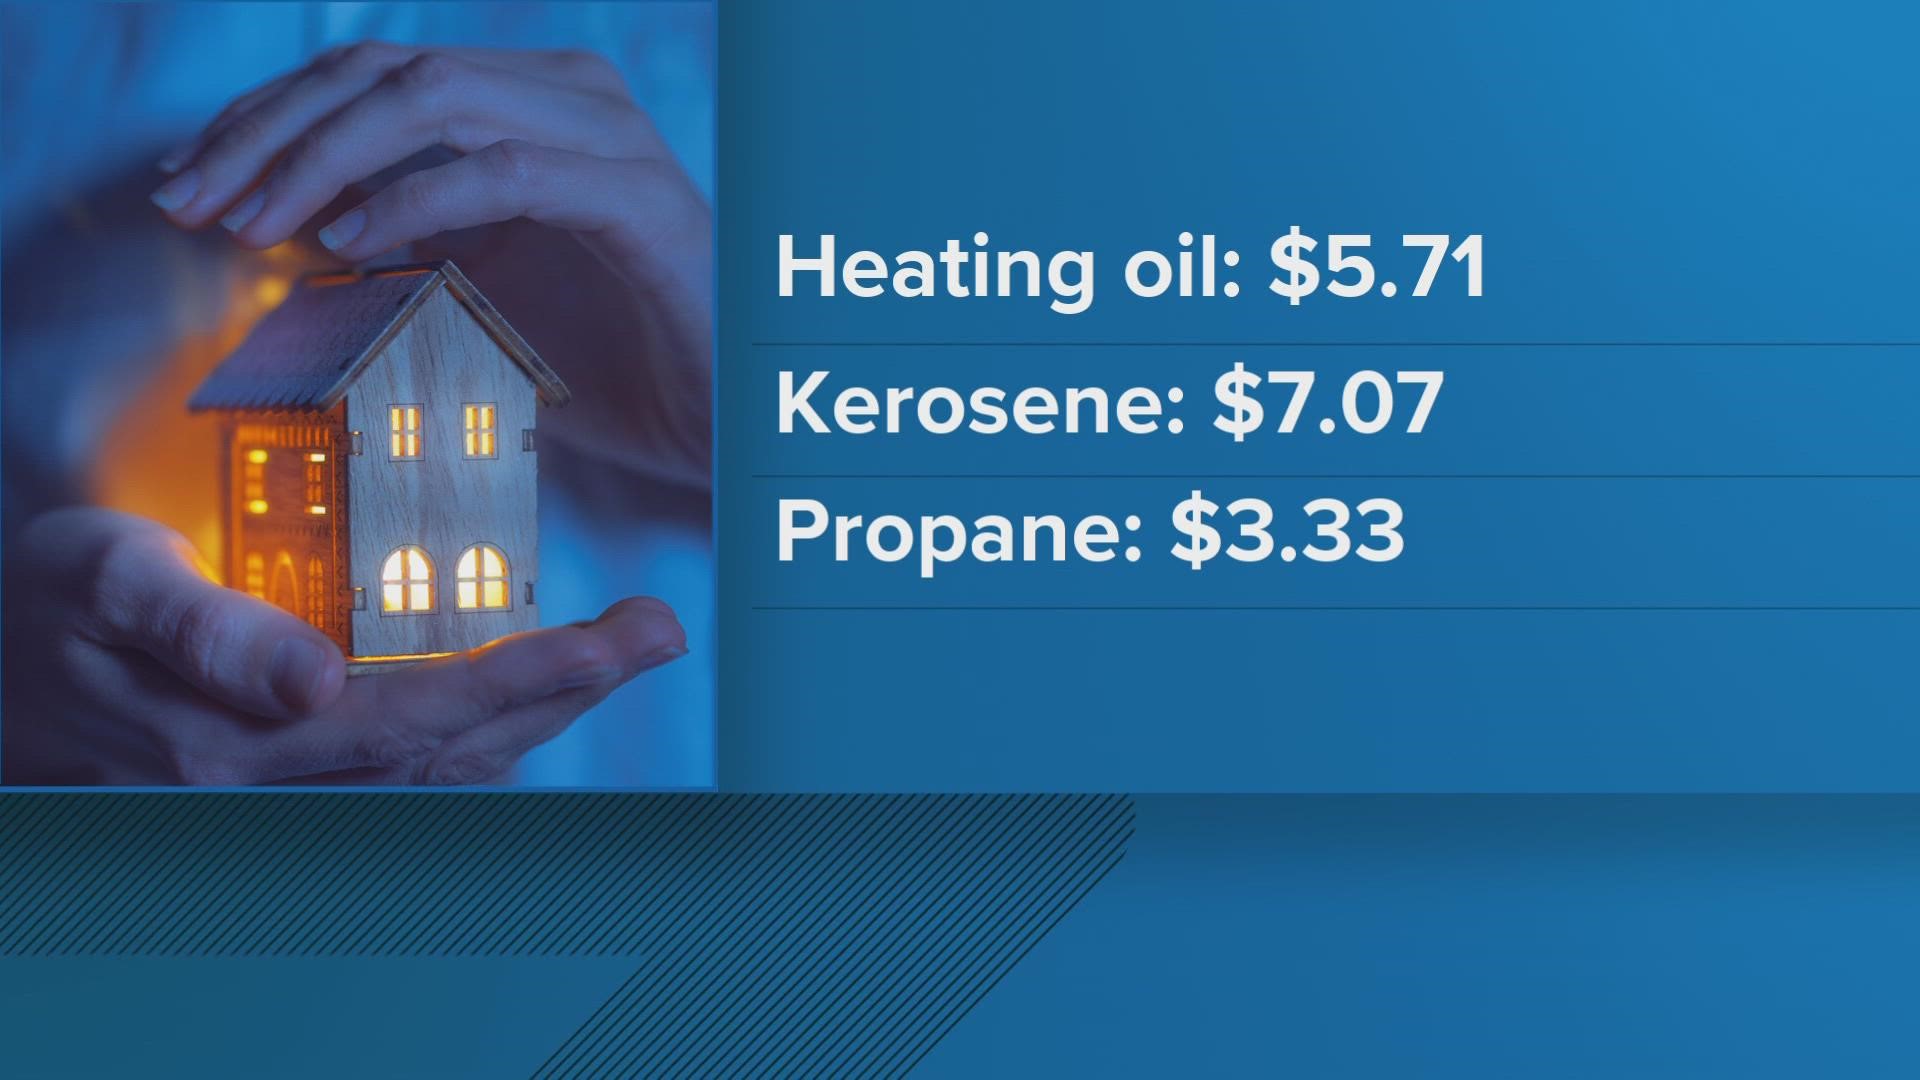 The average of Maine heating oil prices are up $2.56 from $3.15 last year, and kerosene prices up $3.37 from $3.21 last year.